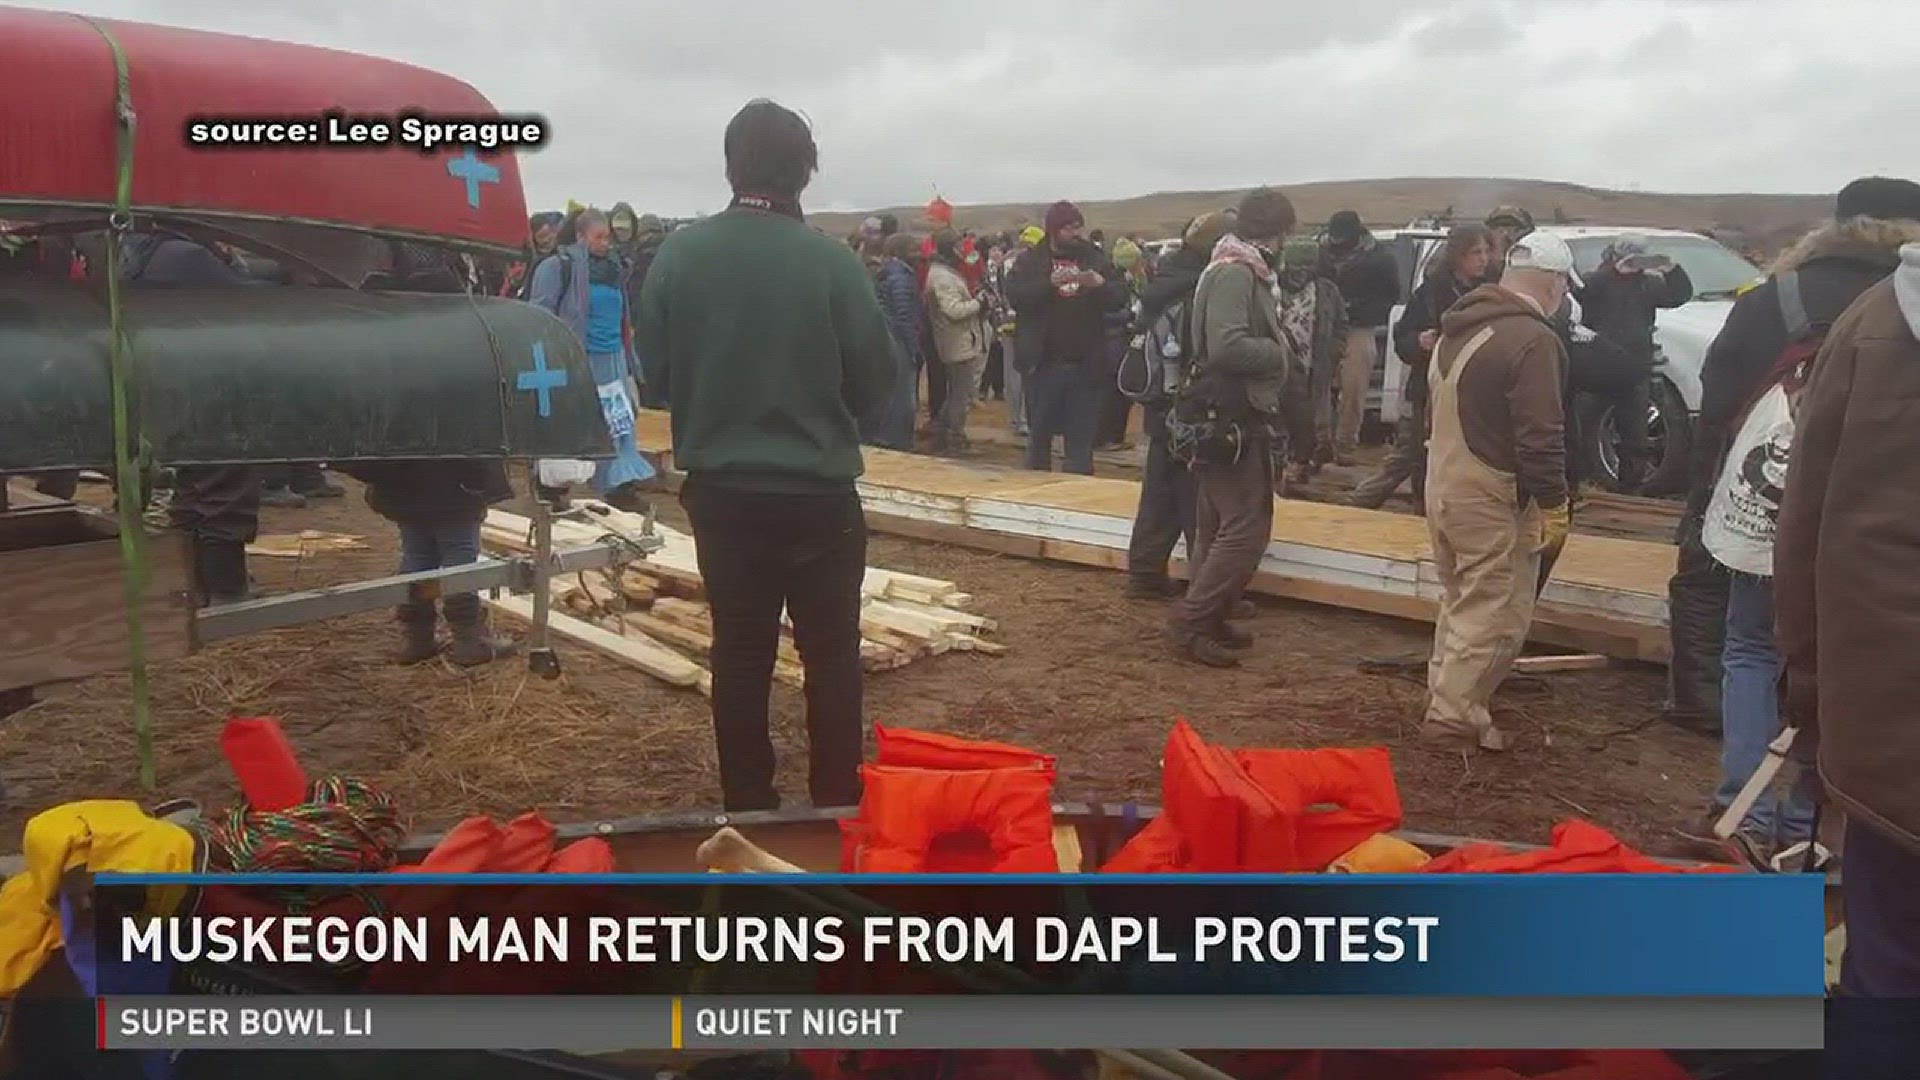 A Muskegon man says he's plans to return to the Dakota Access Pipeline protest despite calls to have people leave.